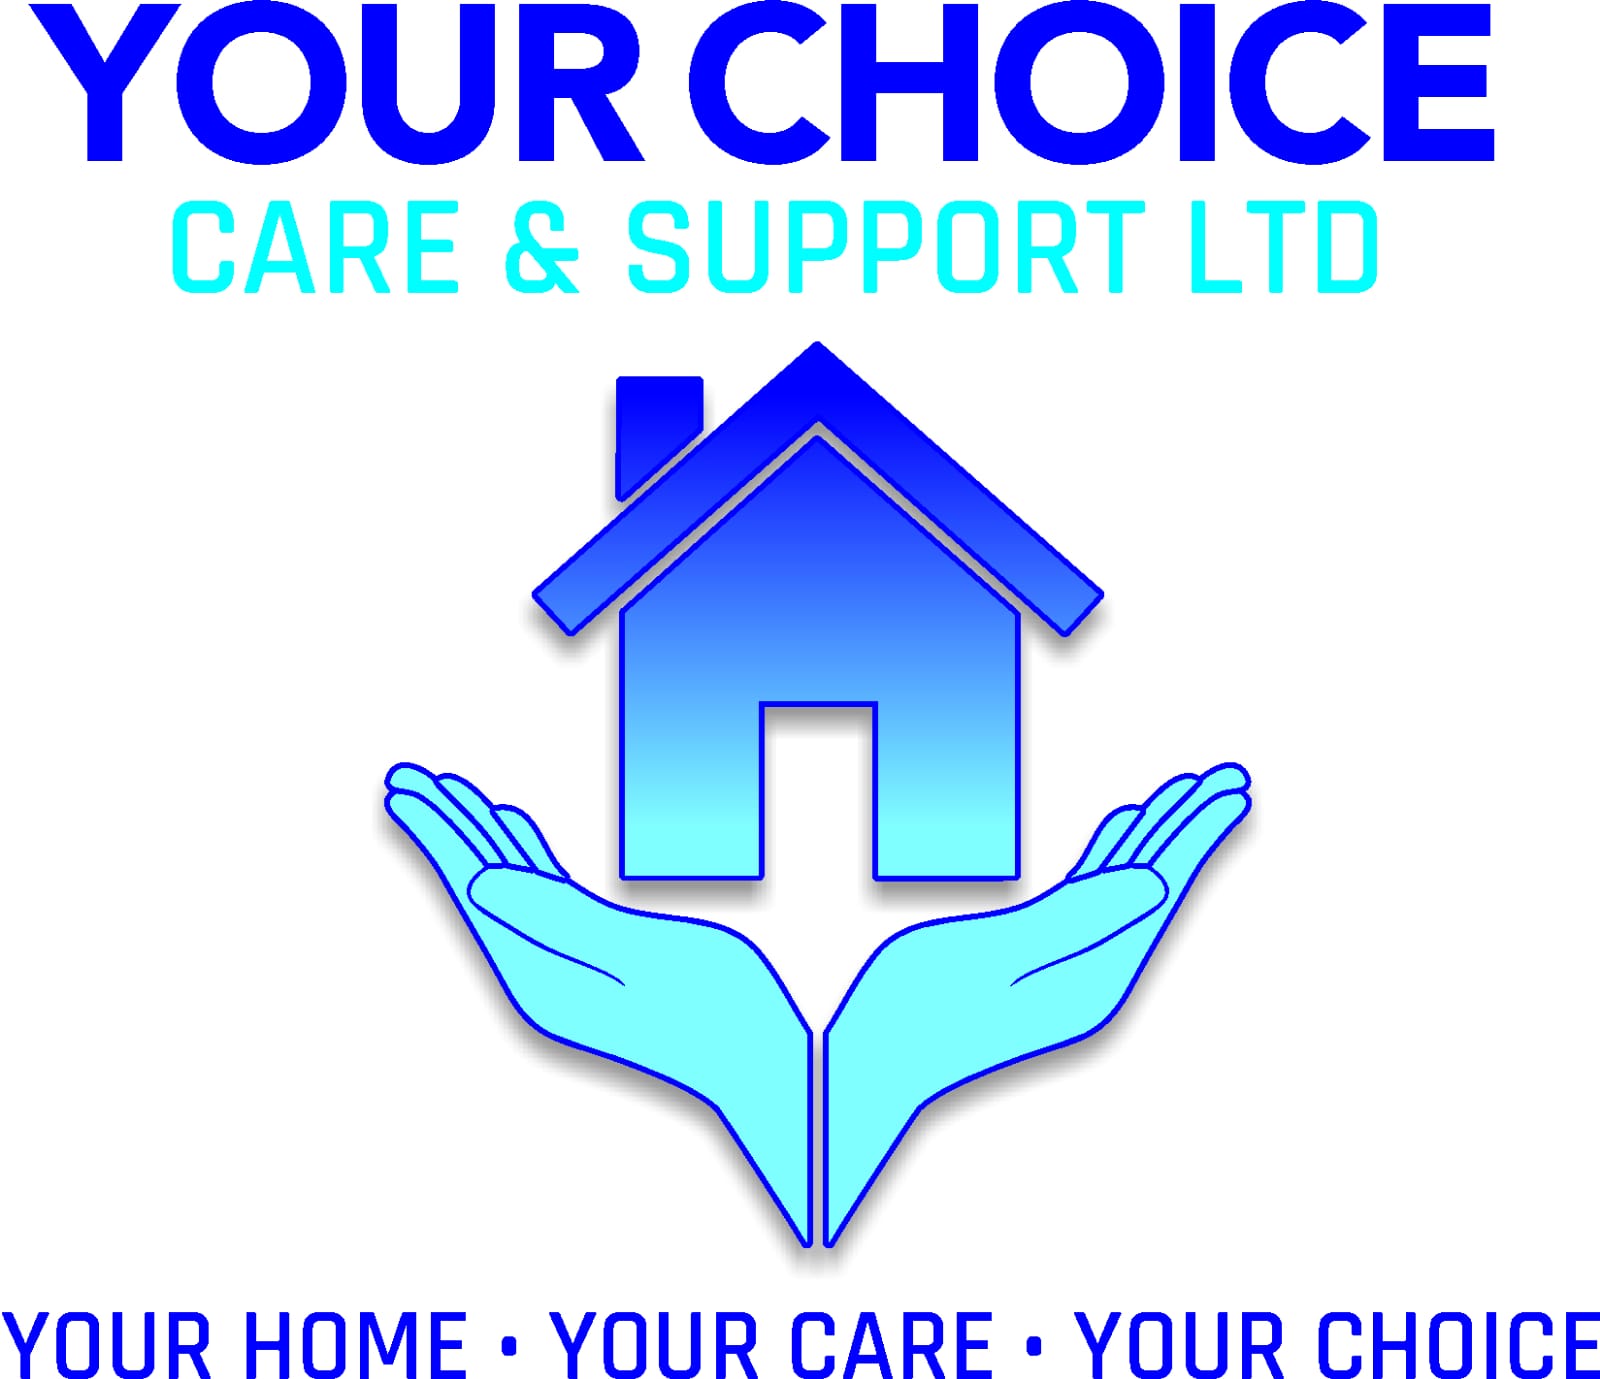 Your Choice Care & Support Ltd